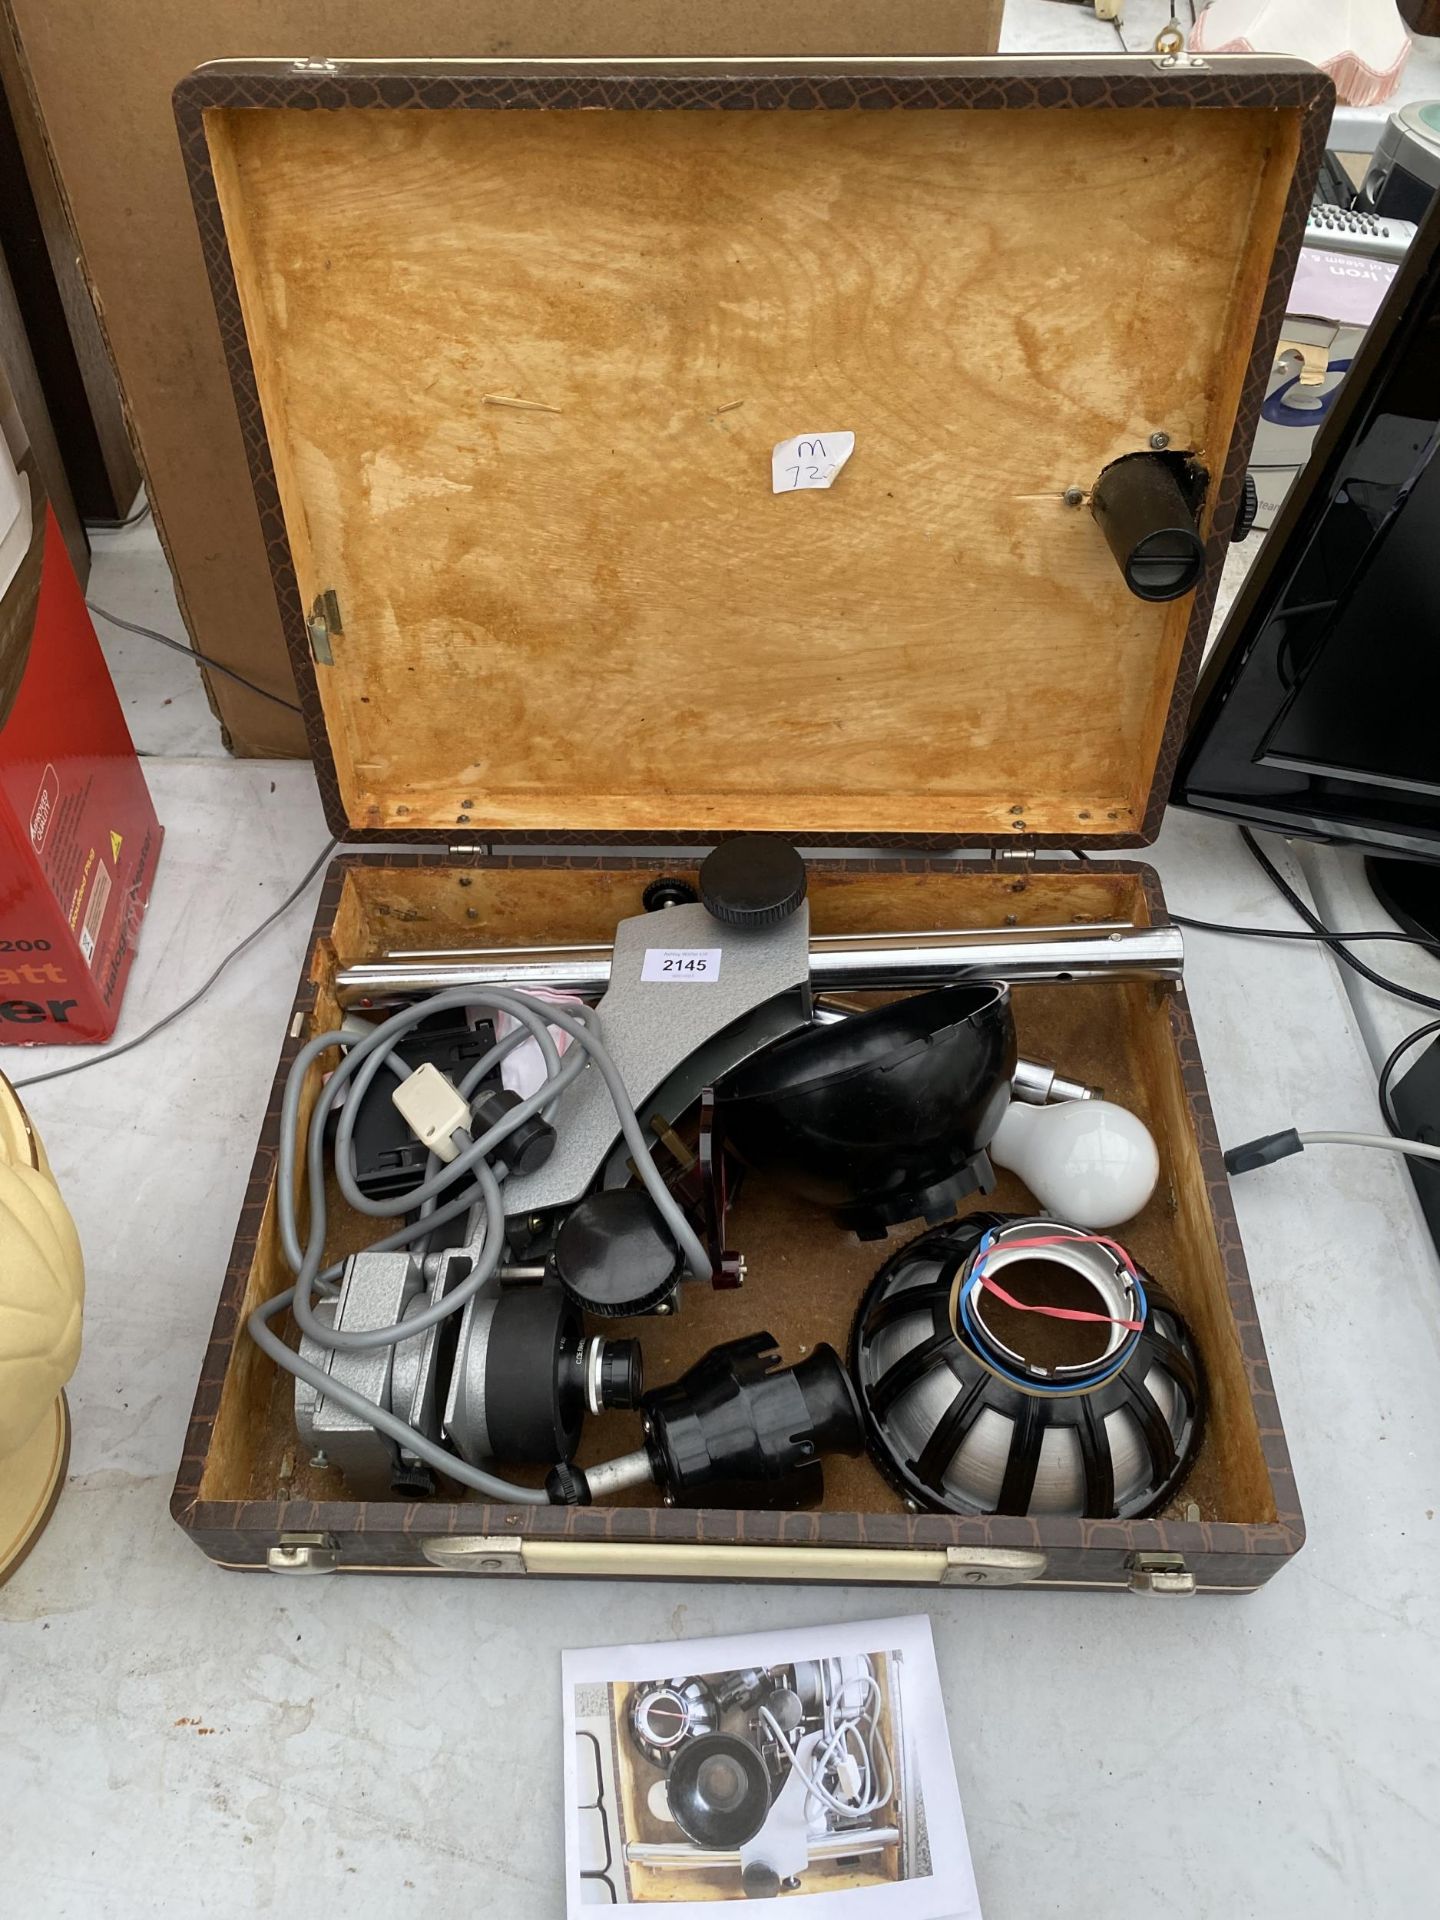 A MICROSCOPE AND ATTATCHMENTS WITH A CARRY CASE